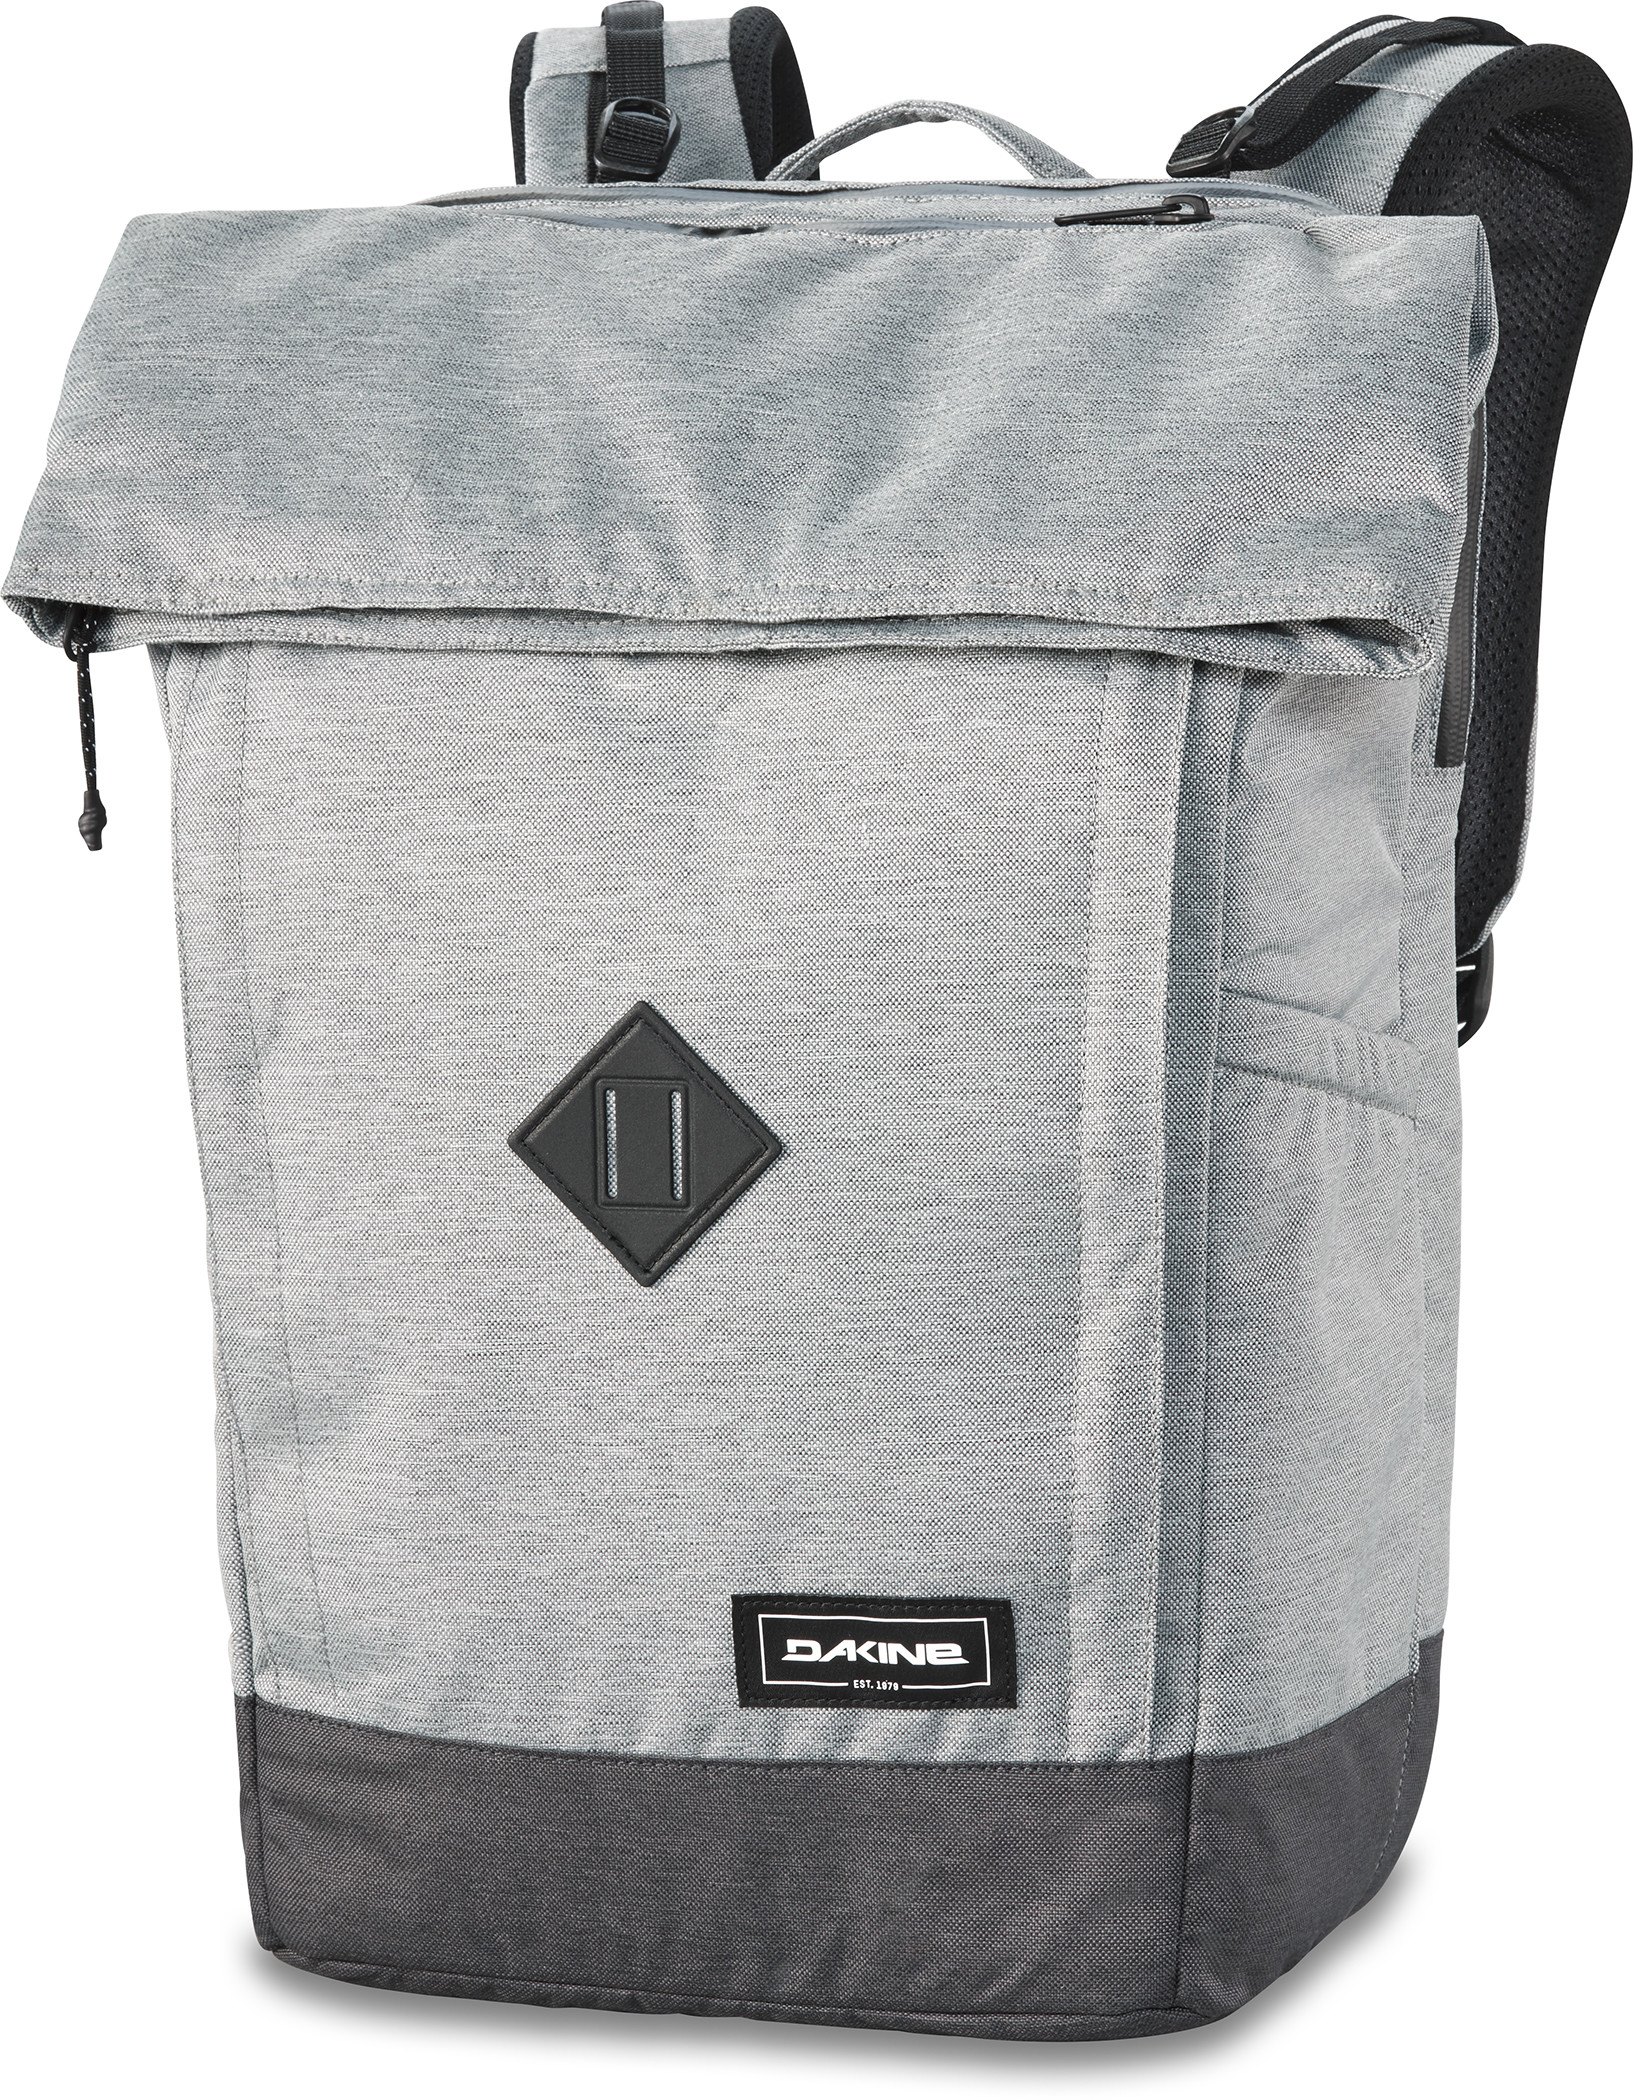 Infinity Pack 21L Backpack